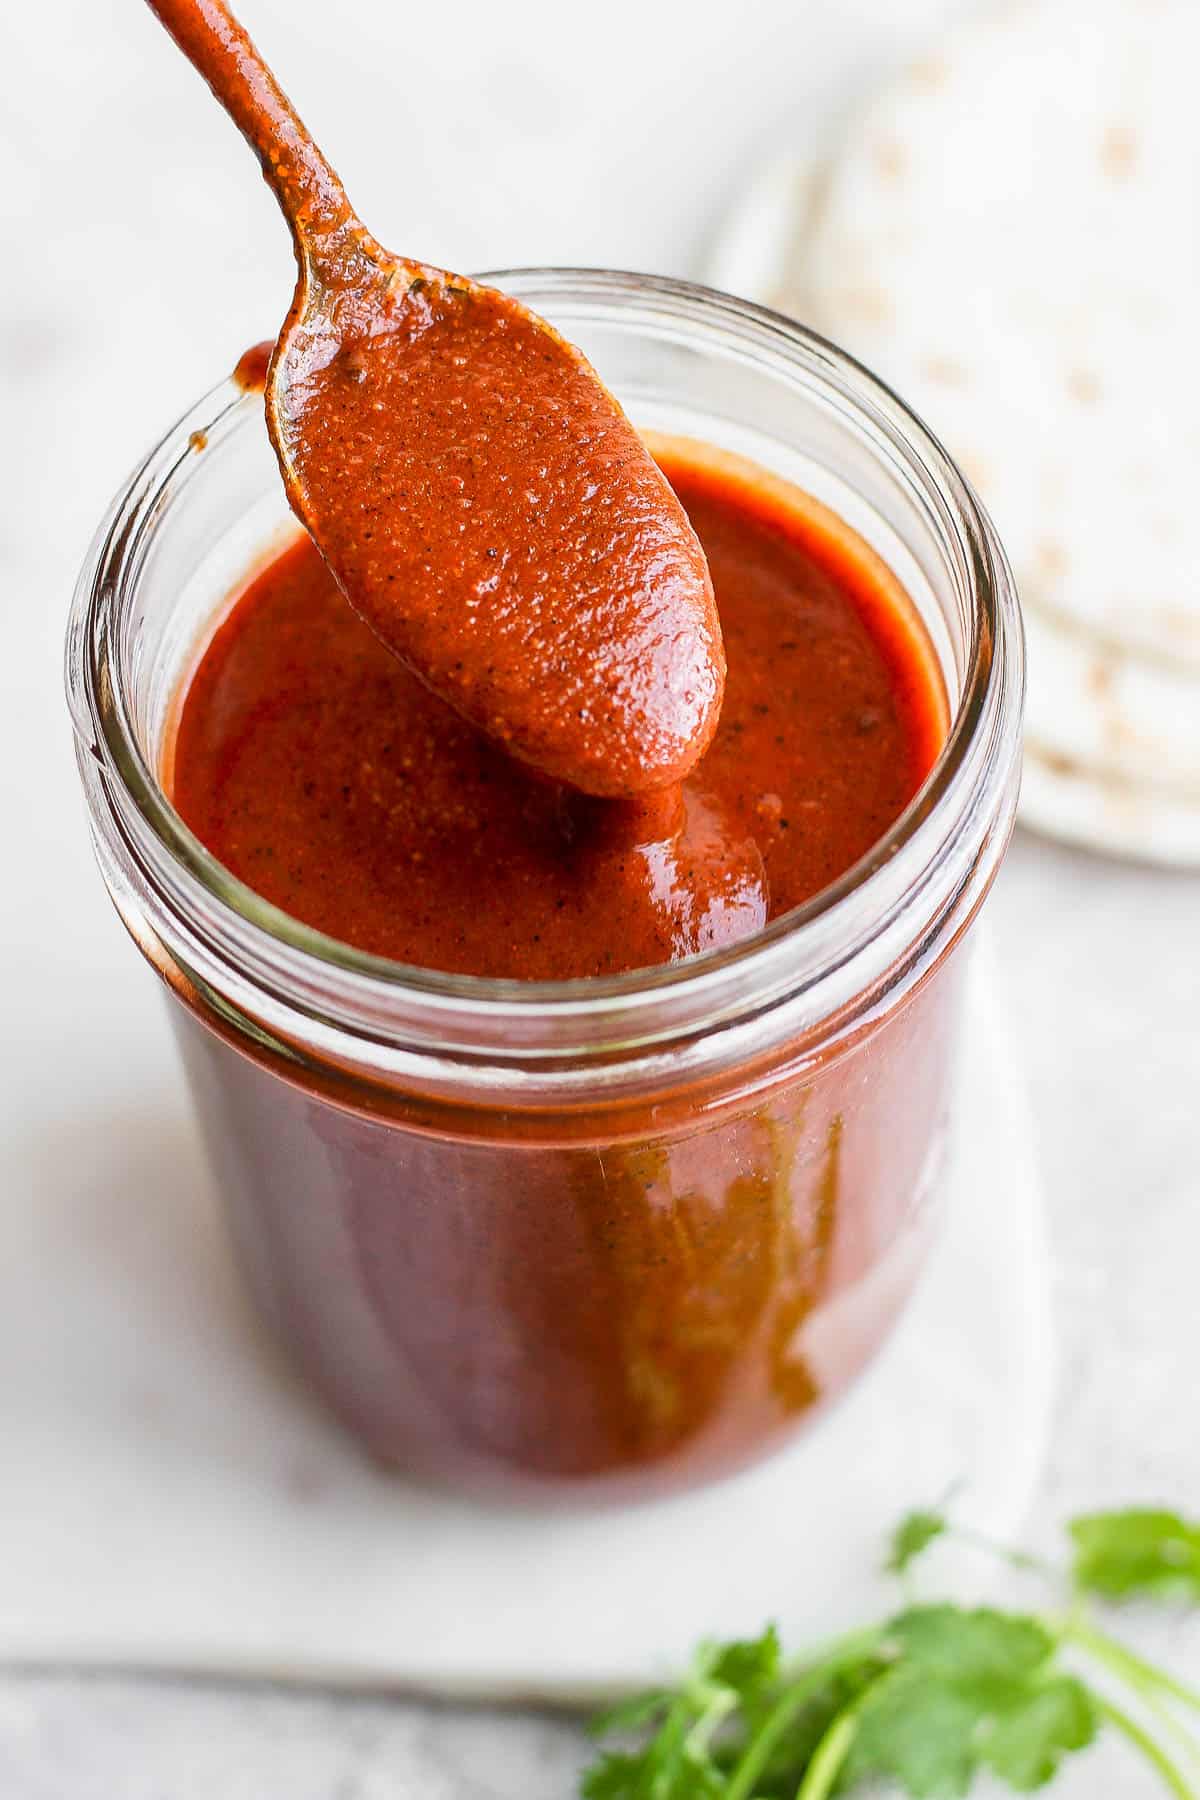 A spoon coming out of the jar with red enchilada sauce.